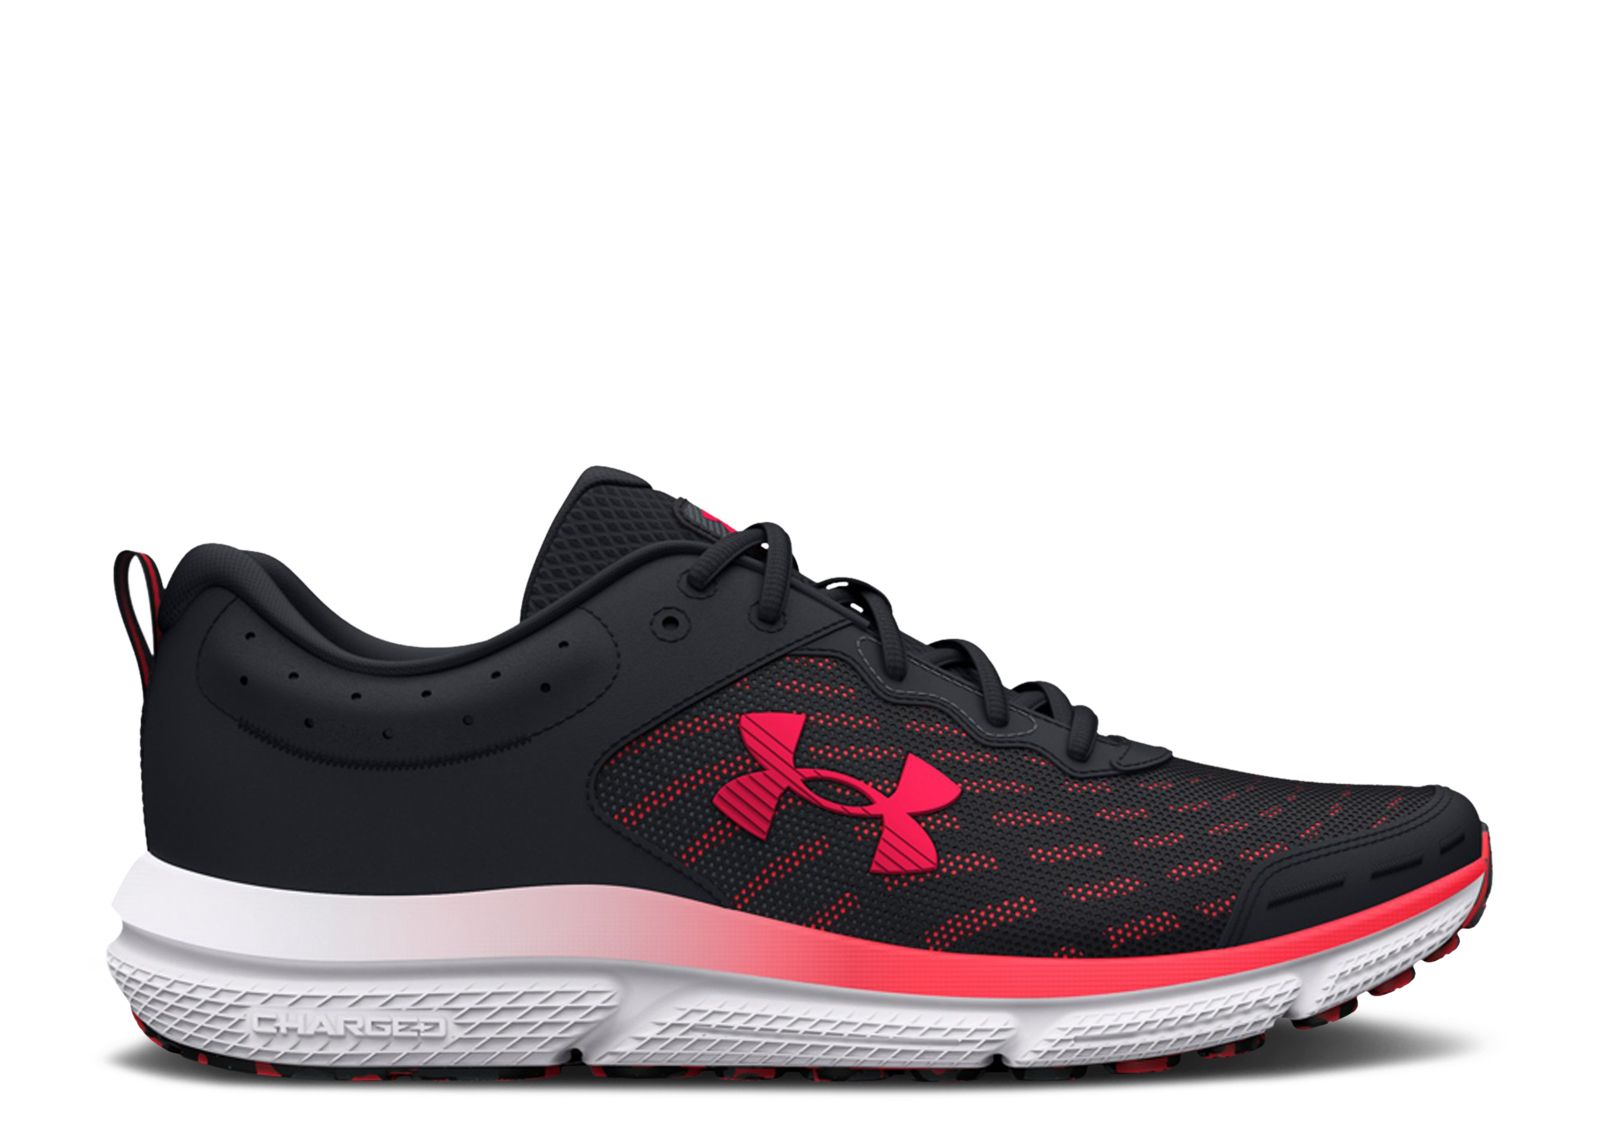 Under Armour Charged Assert 10 'Red Black' 3026175‑600 - 3026175